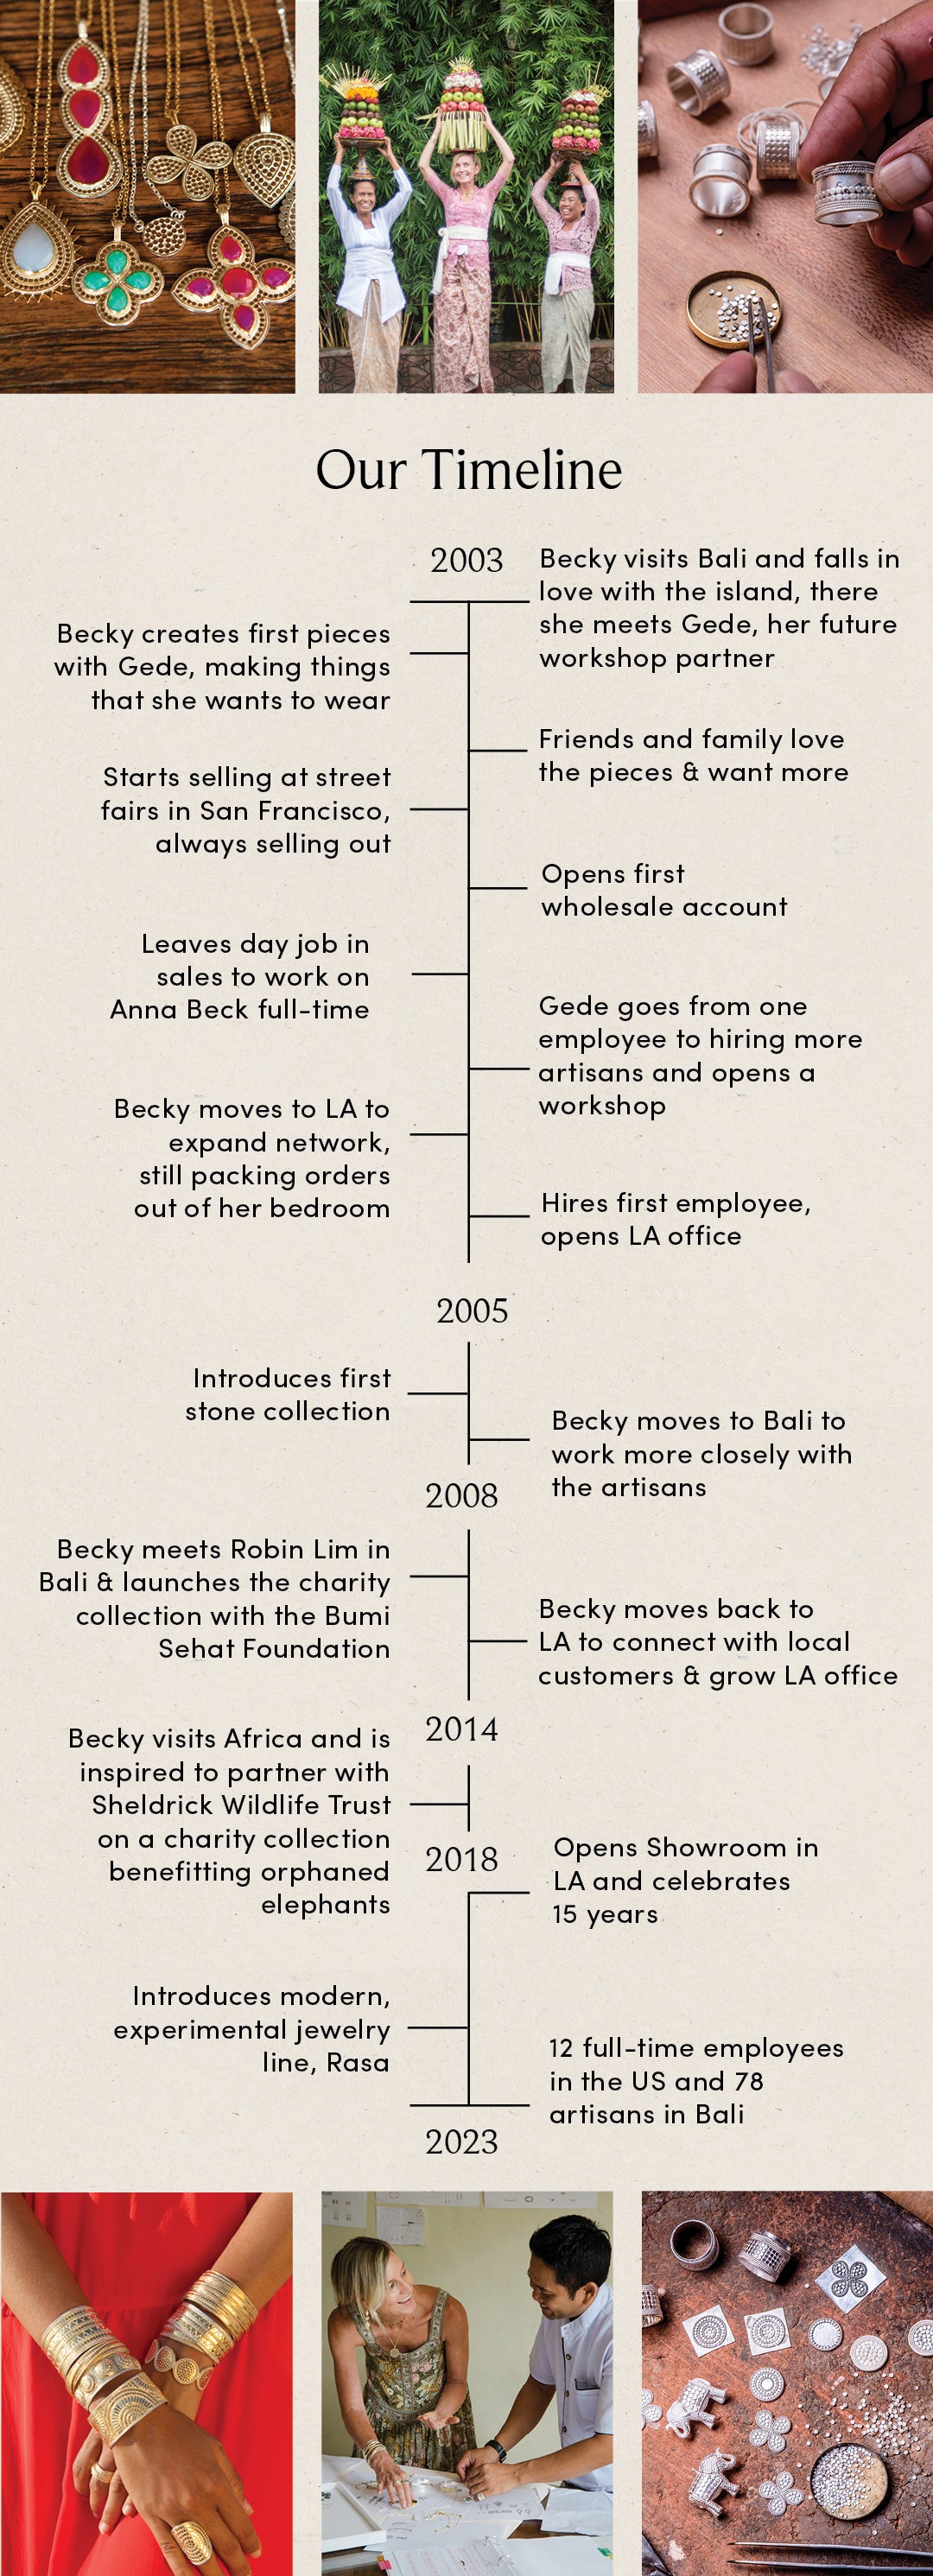 Timeline showing the past 20 years of Anna Beck